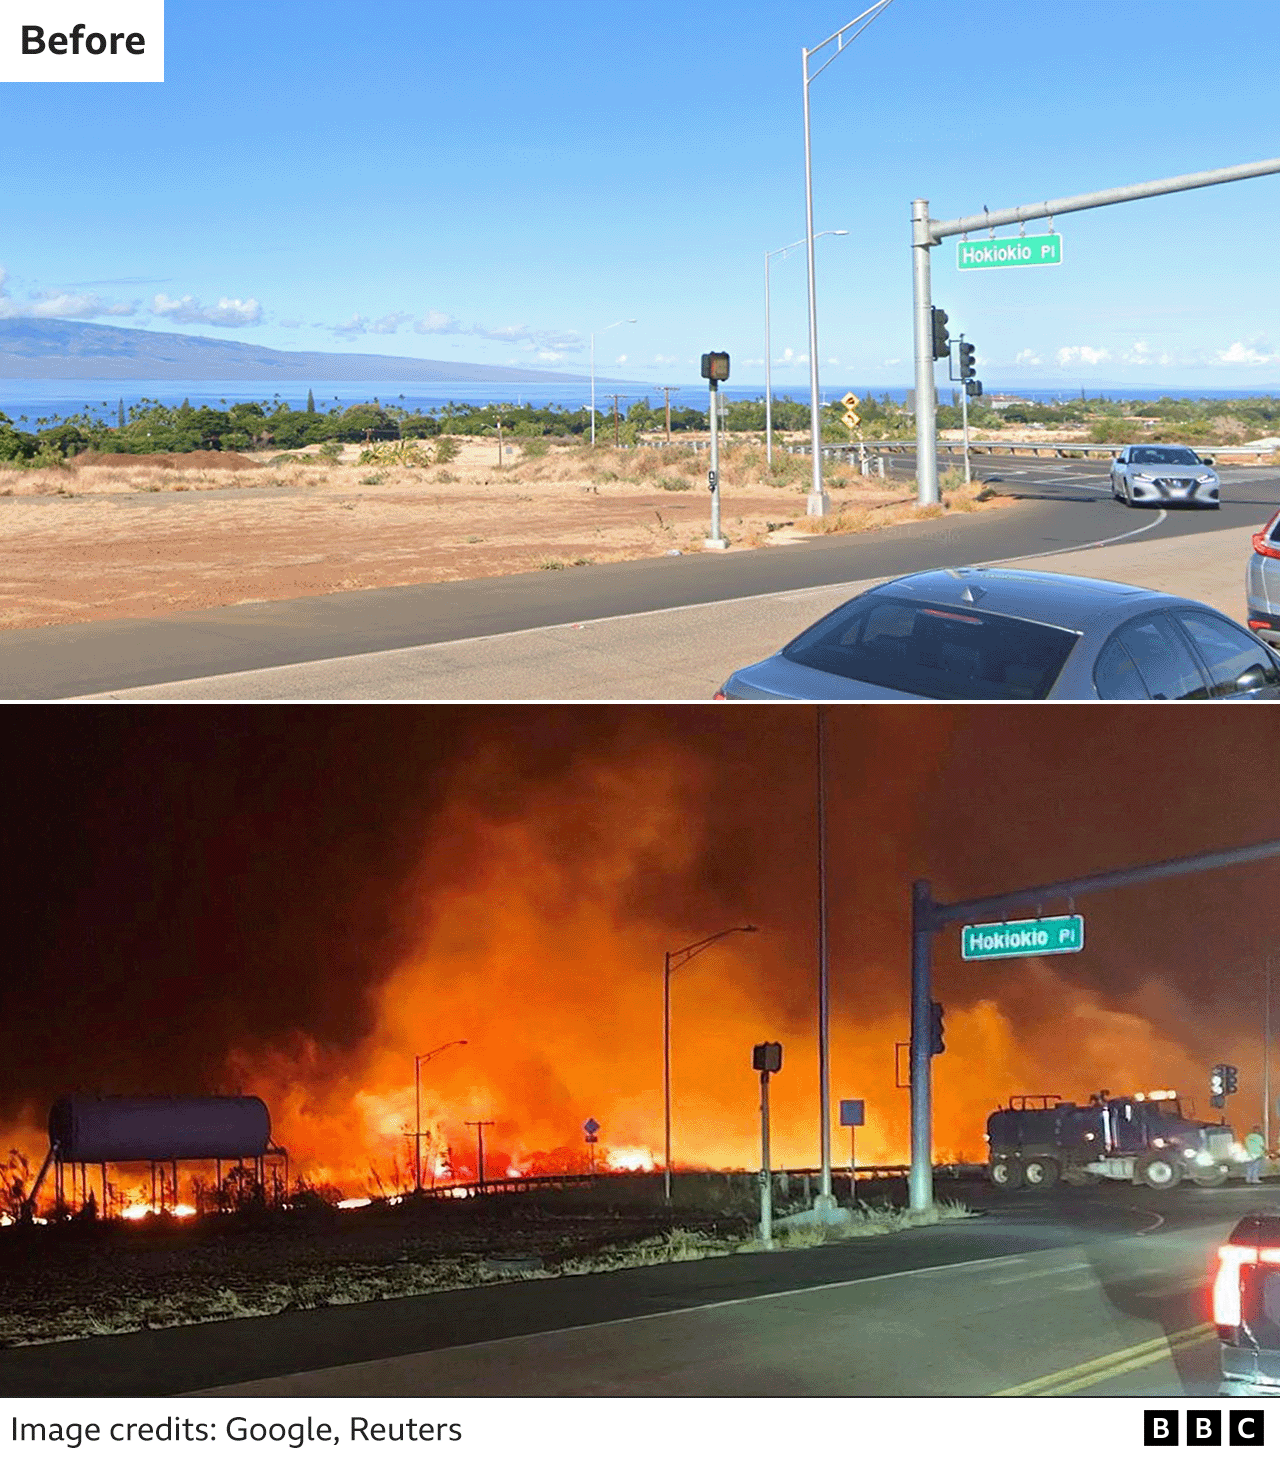 Before and after images show fire burning alongside highway